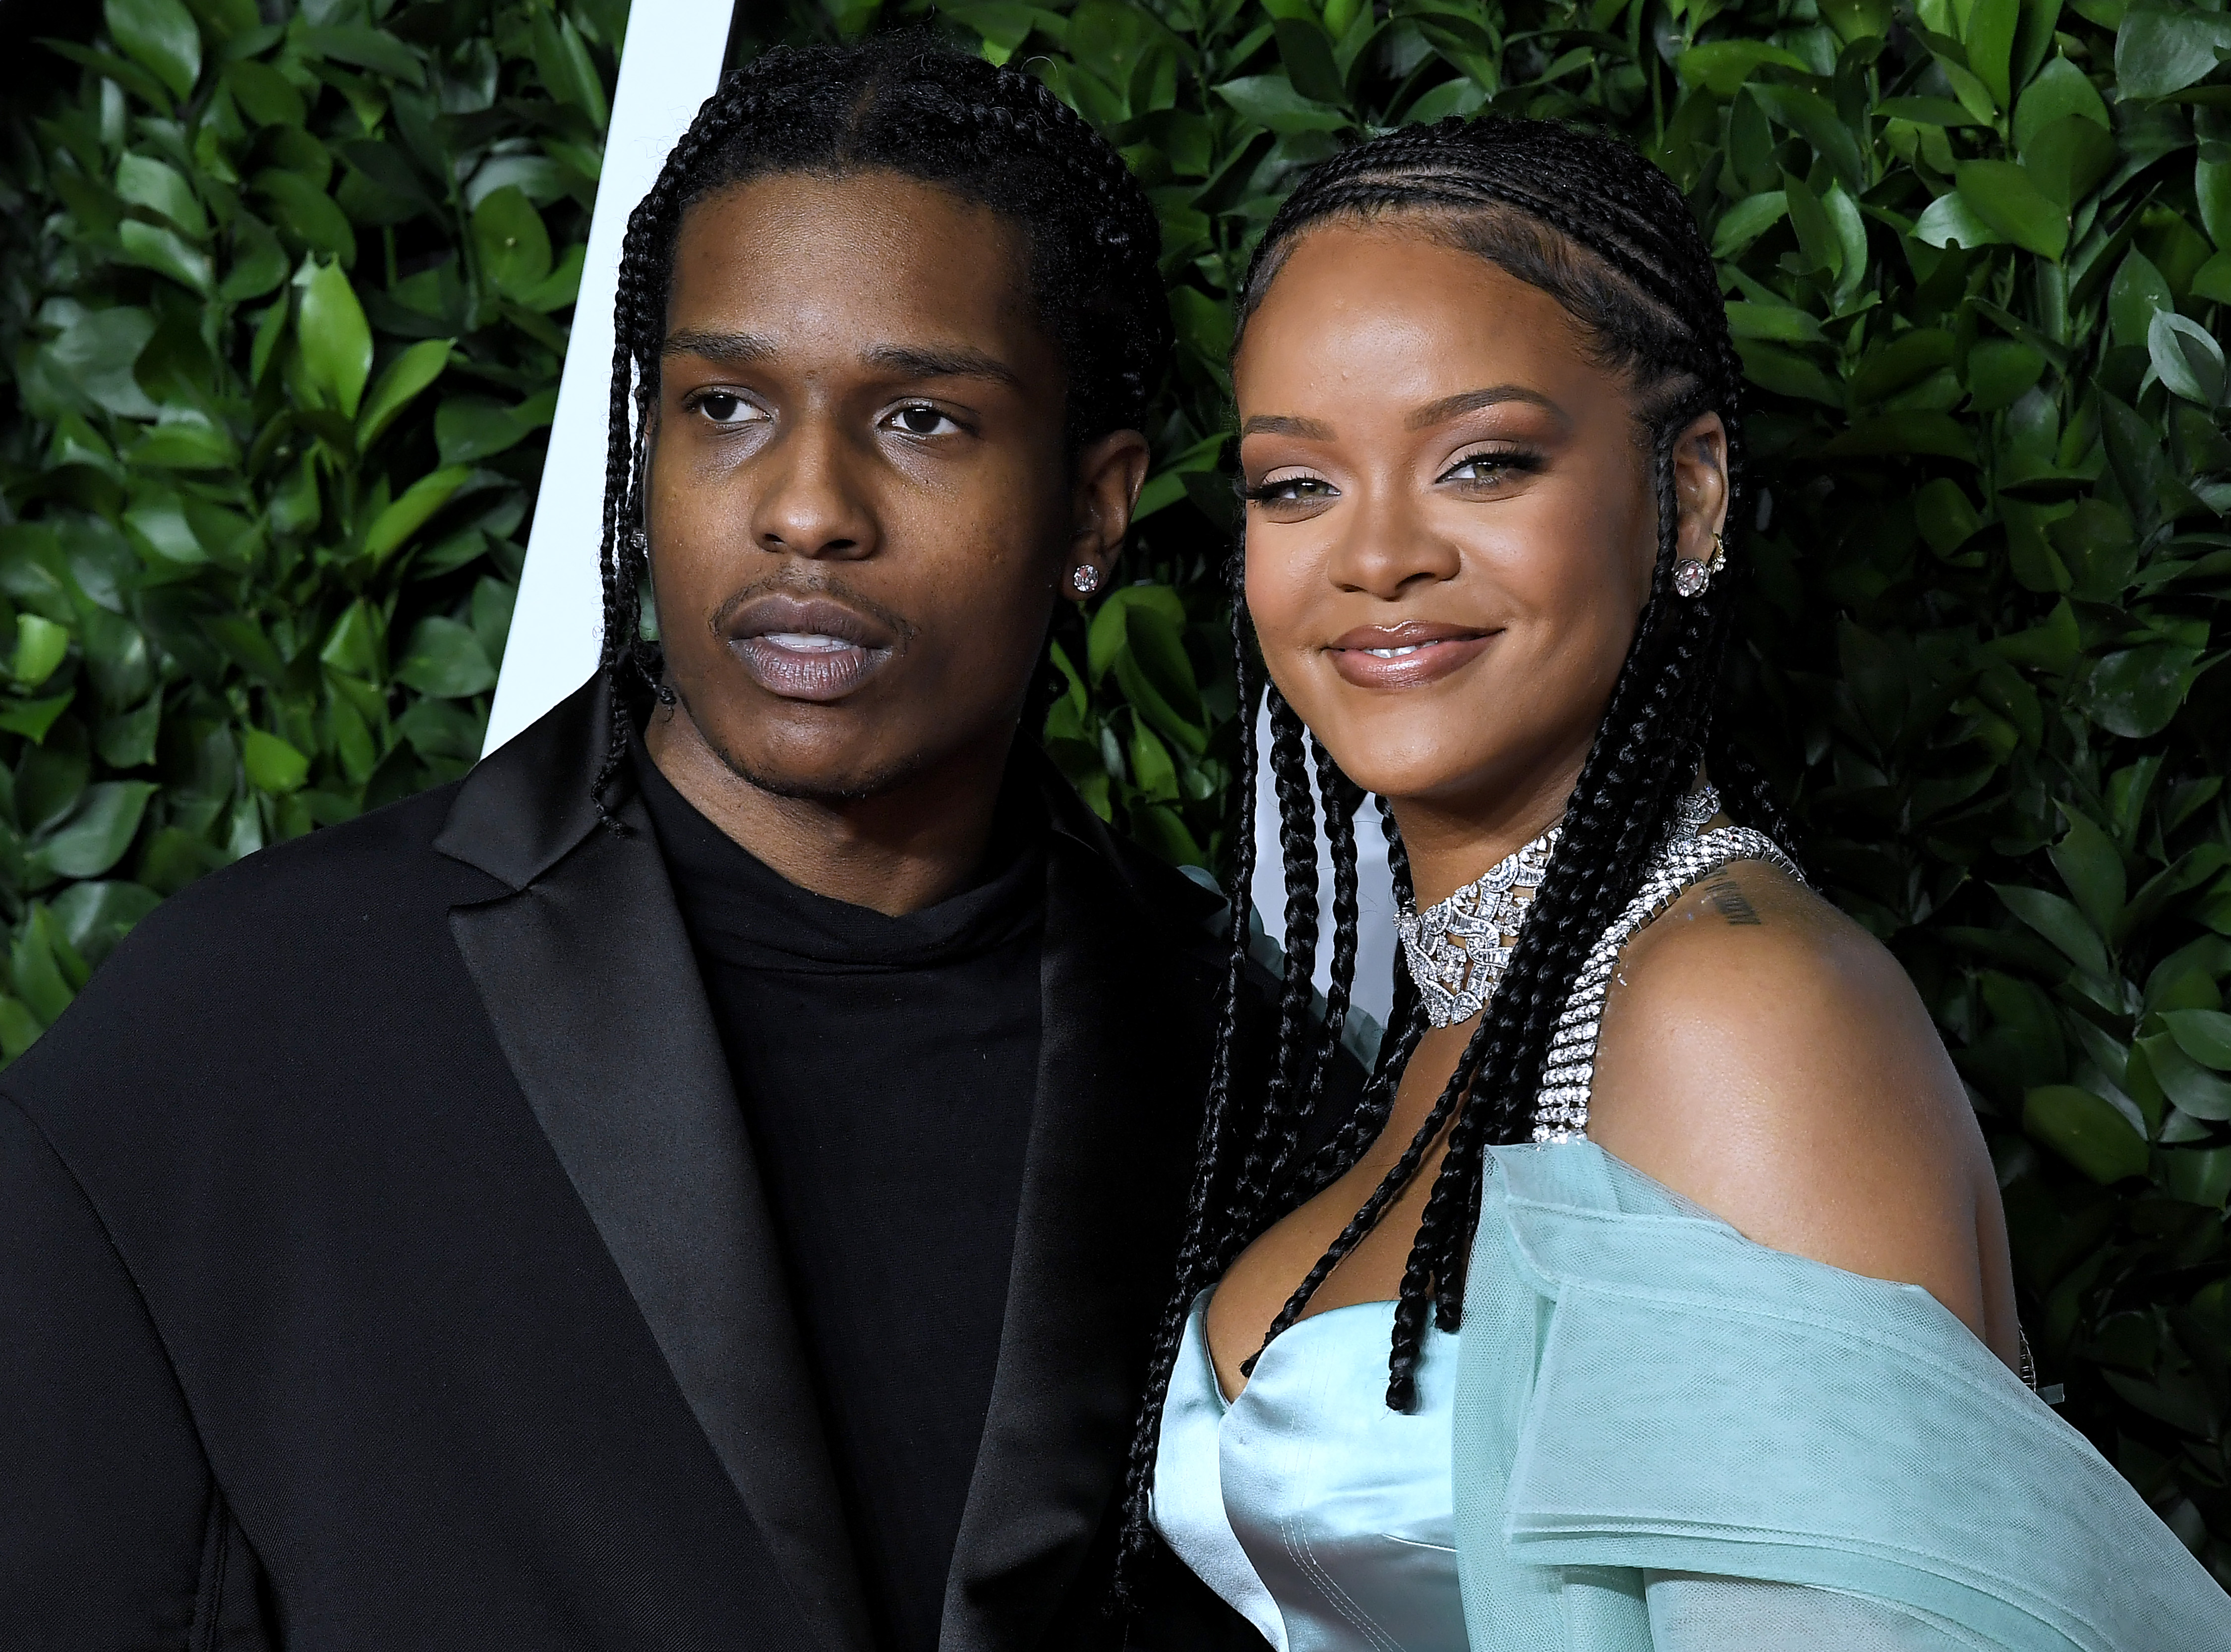 chanel iman and asap rocky engaged